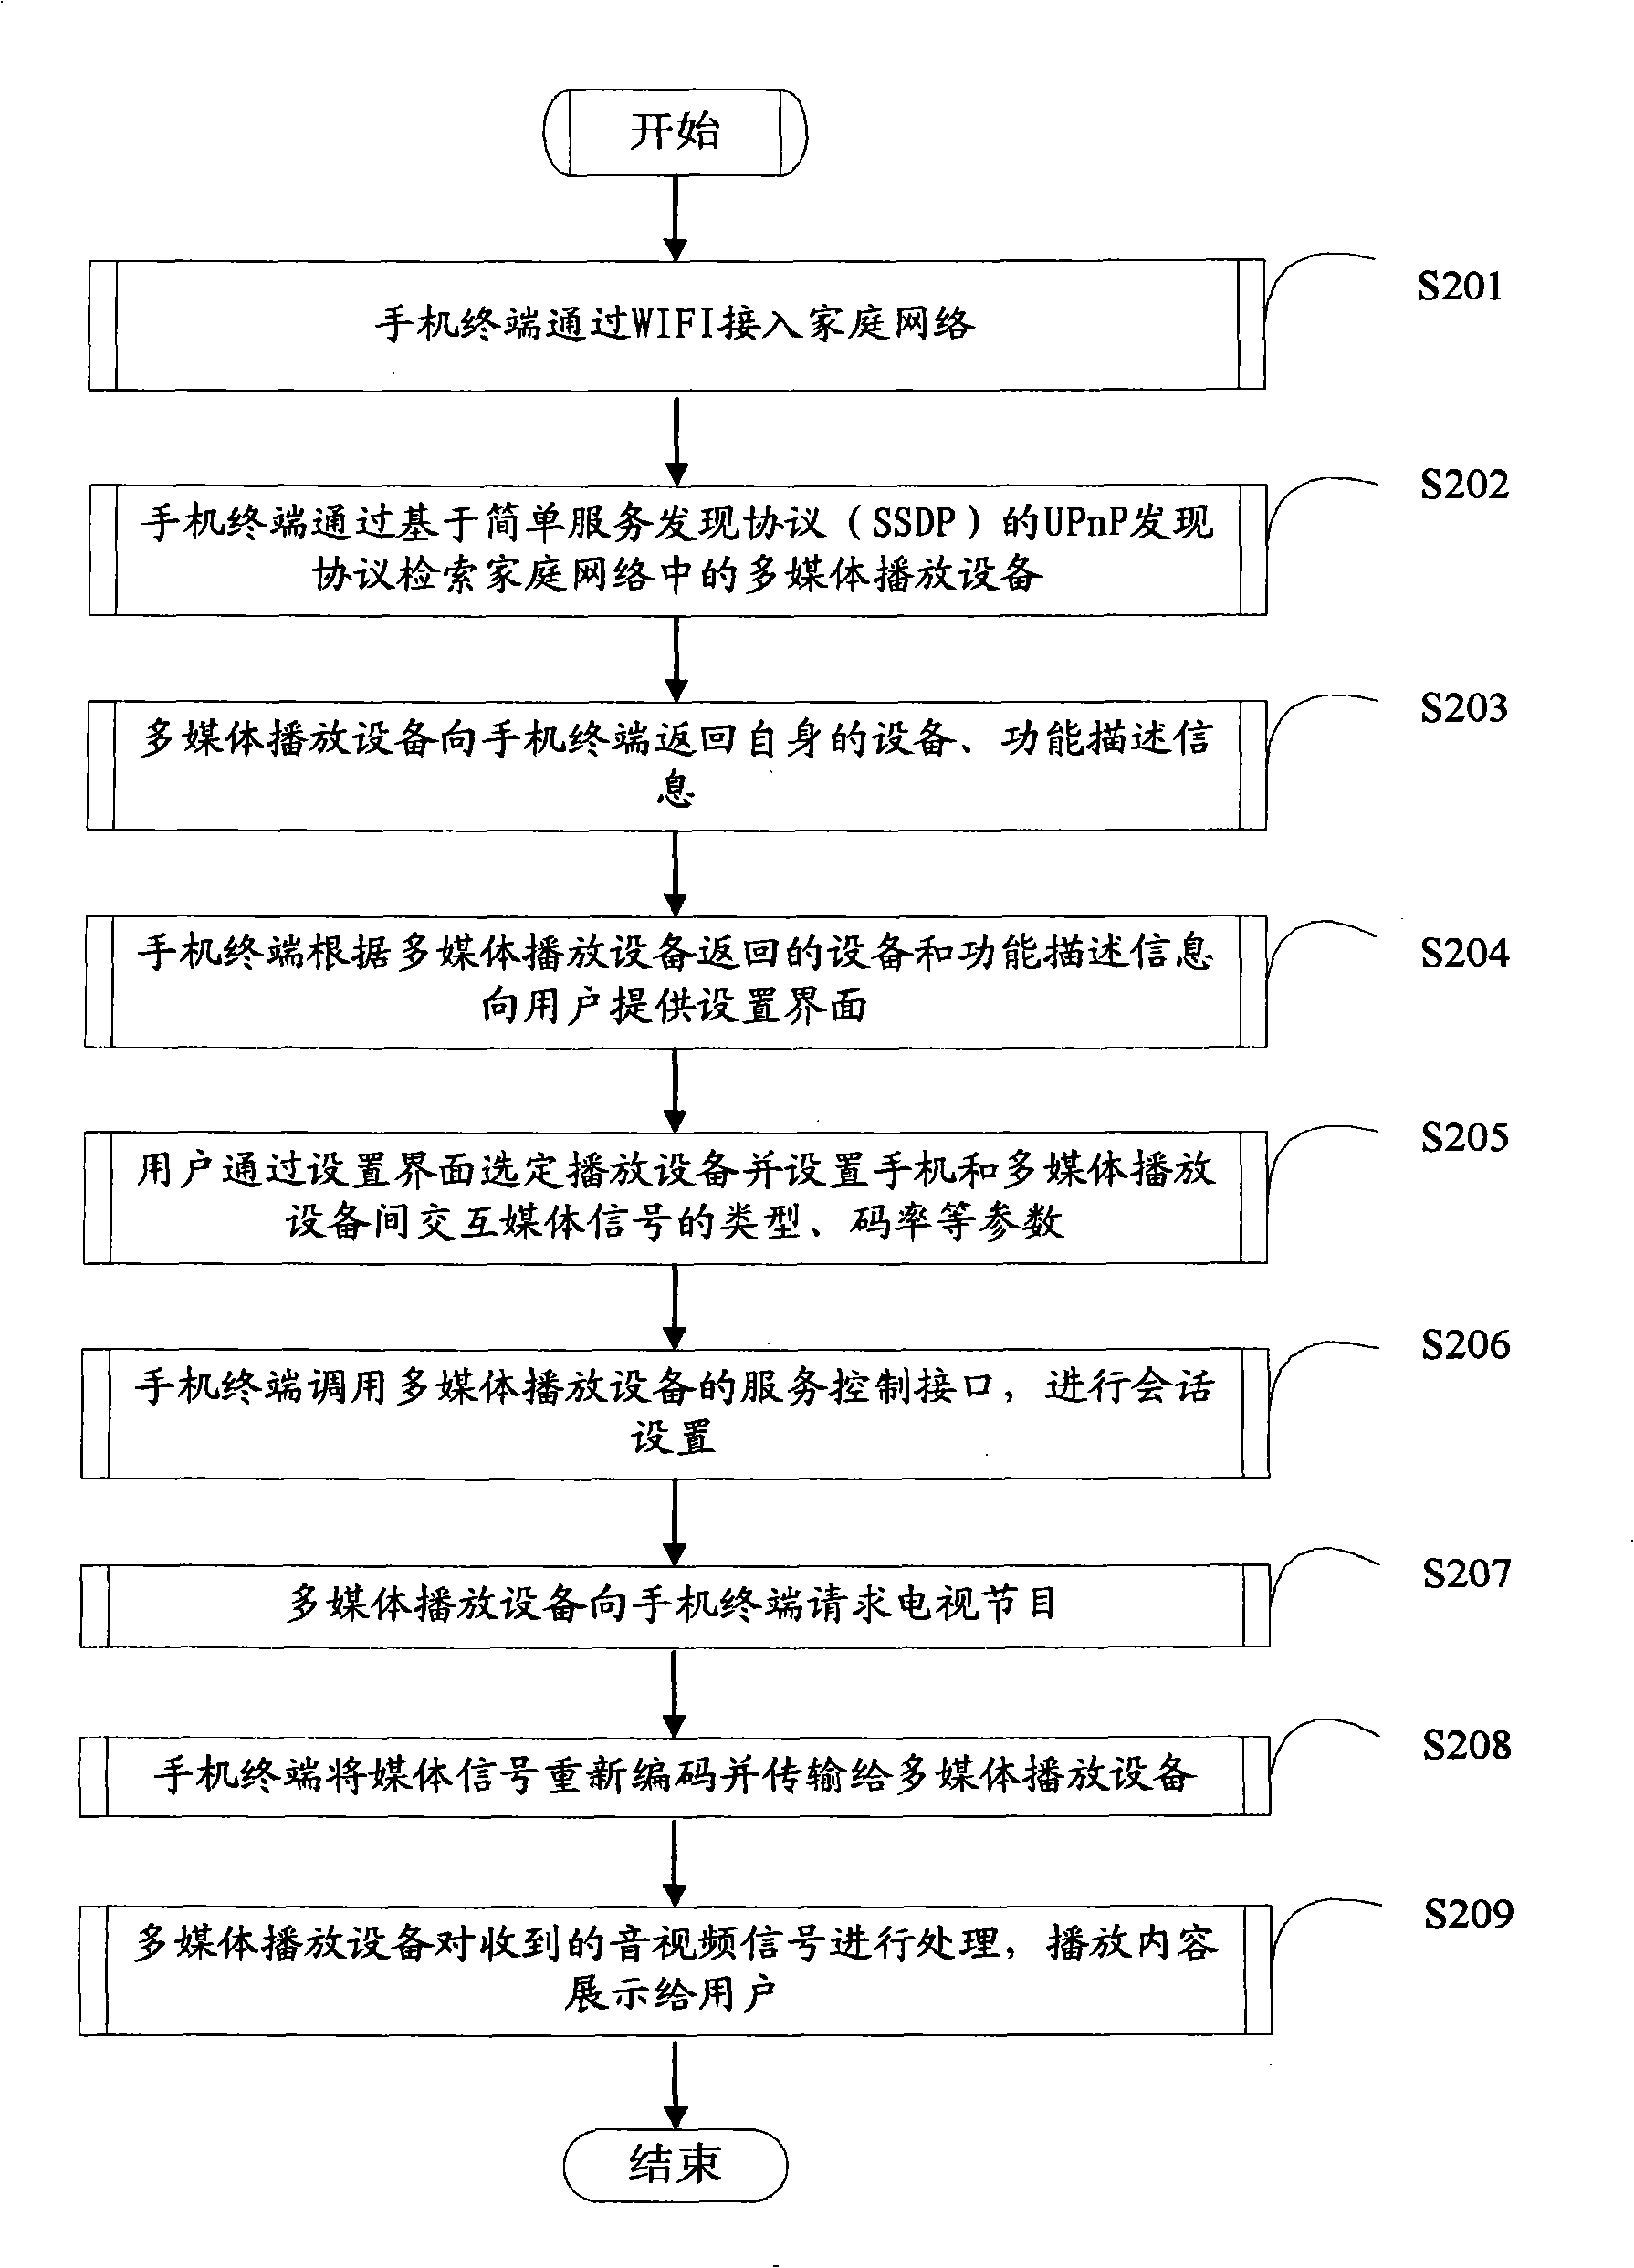 Method and mobile terminal for playing mobile phone television service on multimedia playing equipment